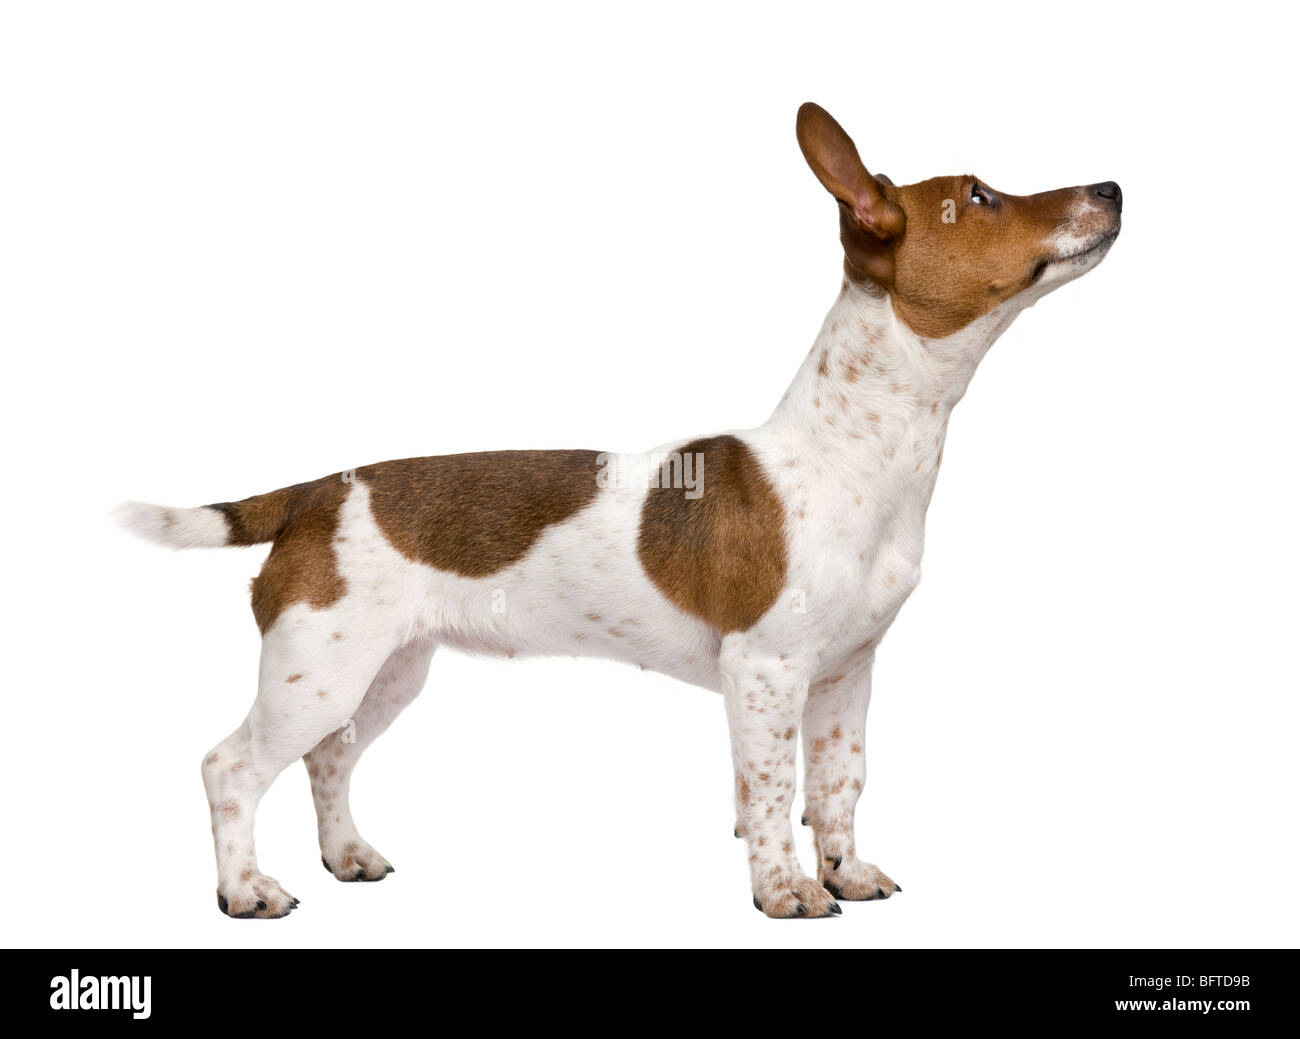 Jack Russell Terrier puppy, 7 months old, standing in front of a white background Stock Photo